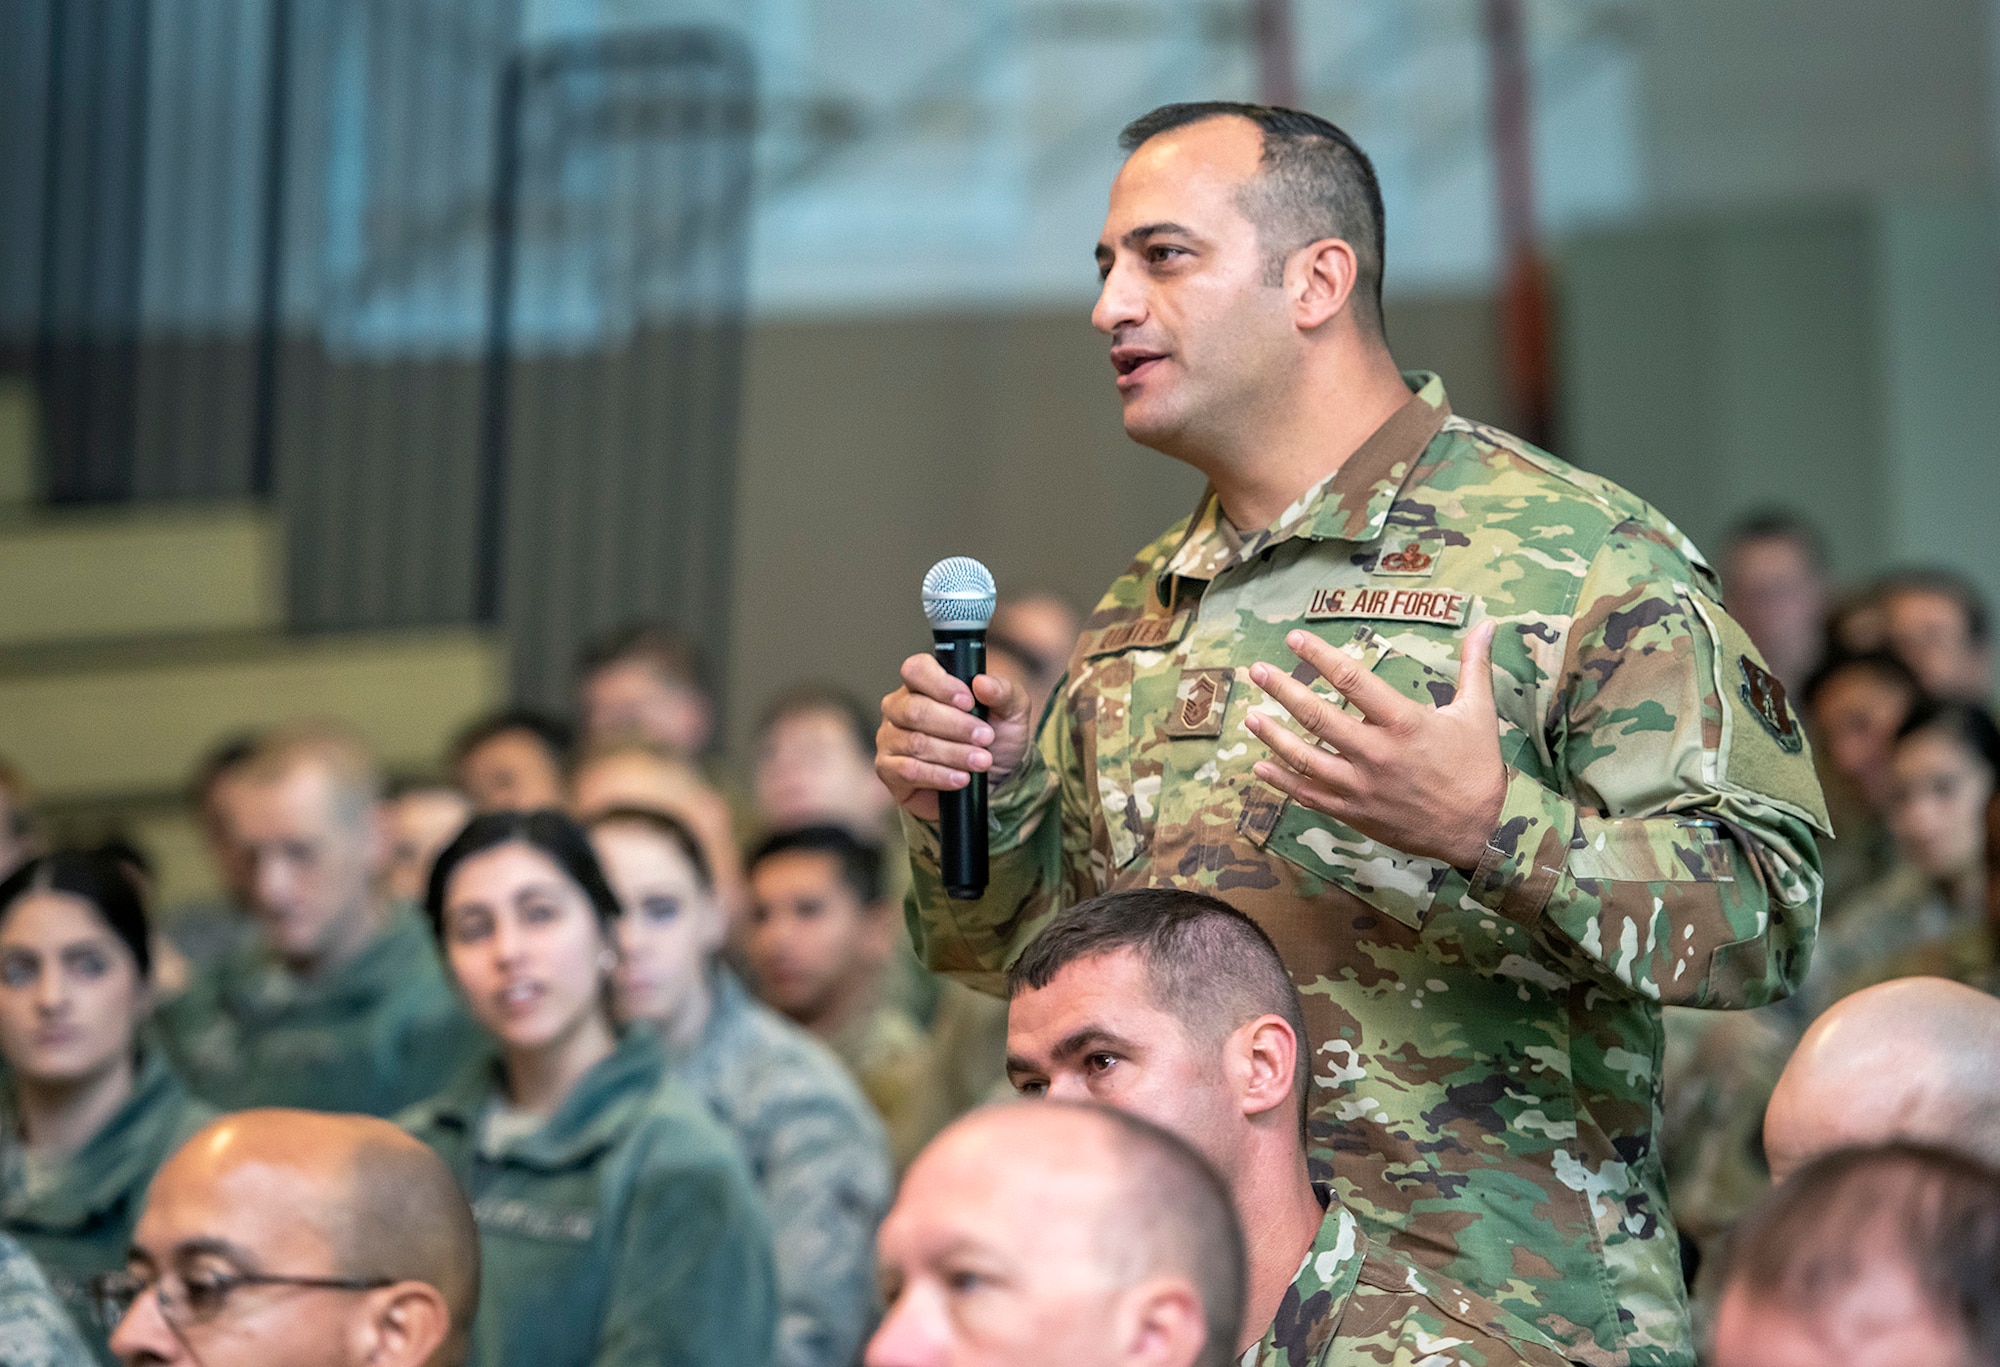 Senior Master Sgt. David Quintero, 159th Maintenance Group, Louisiana Air National Guard, asks a question about the future of the F-15 program to U.S. Air Force Lt. Gen. L. Scott Rice, director of the Air National Guard, at Naval Air Station Joint Reserve Base New Orleans, Nov. 3, 2019.